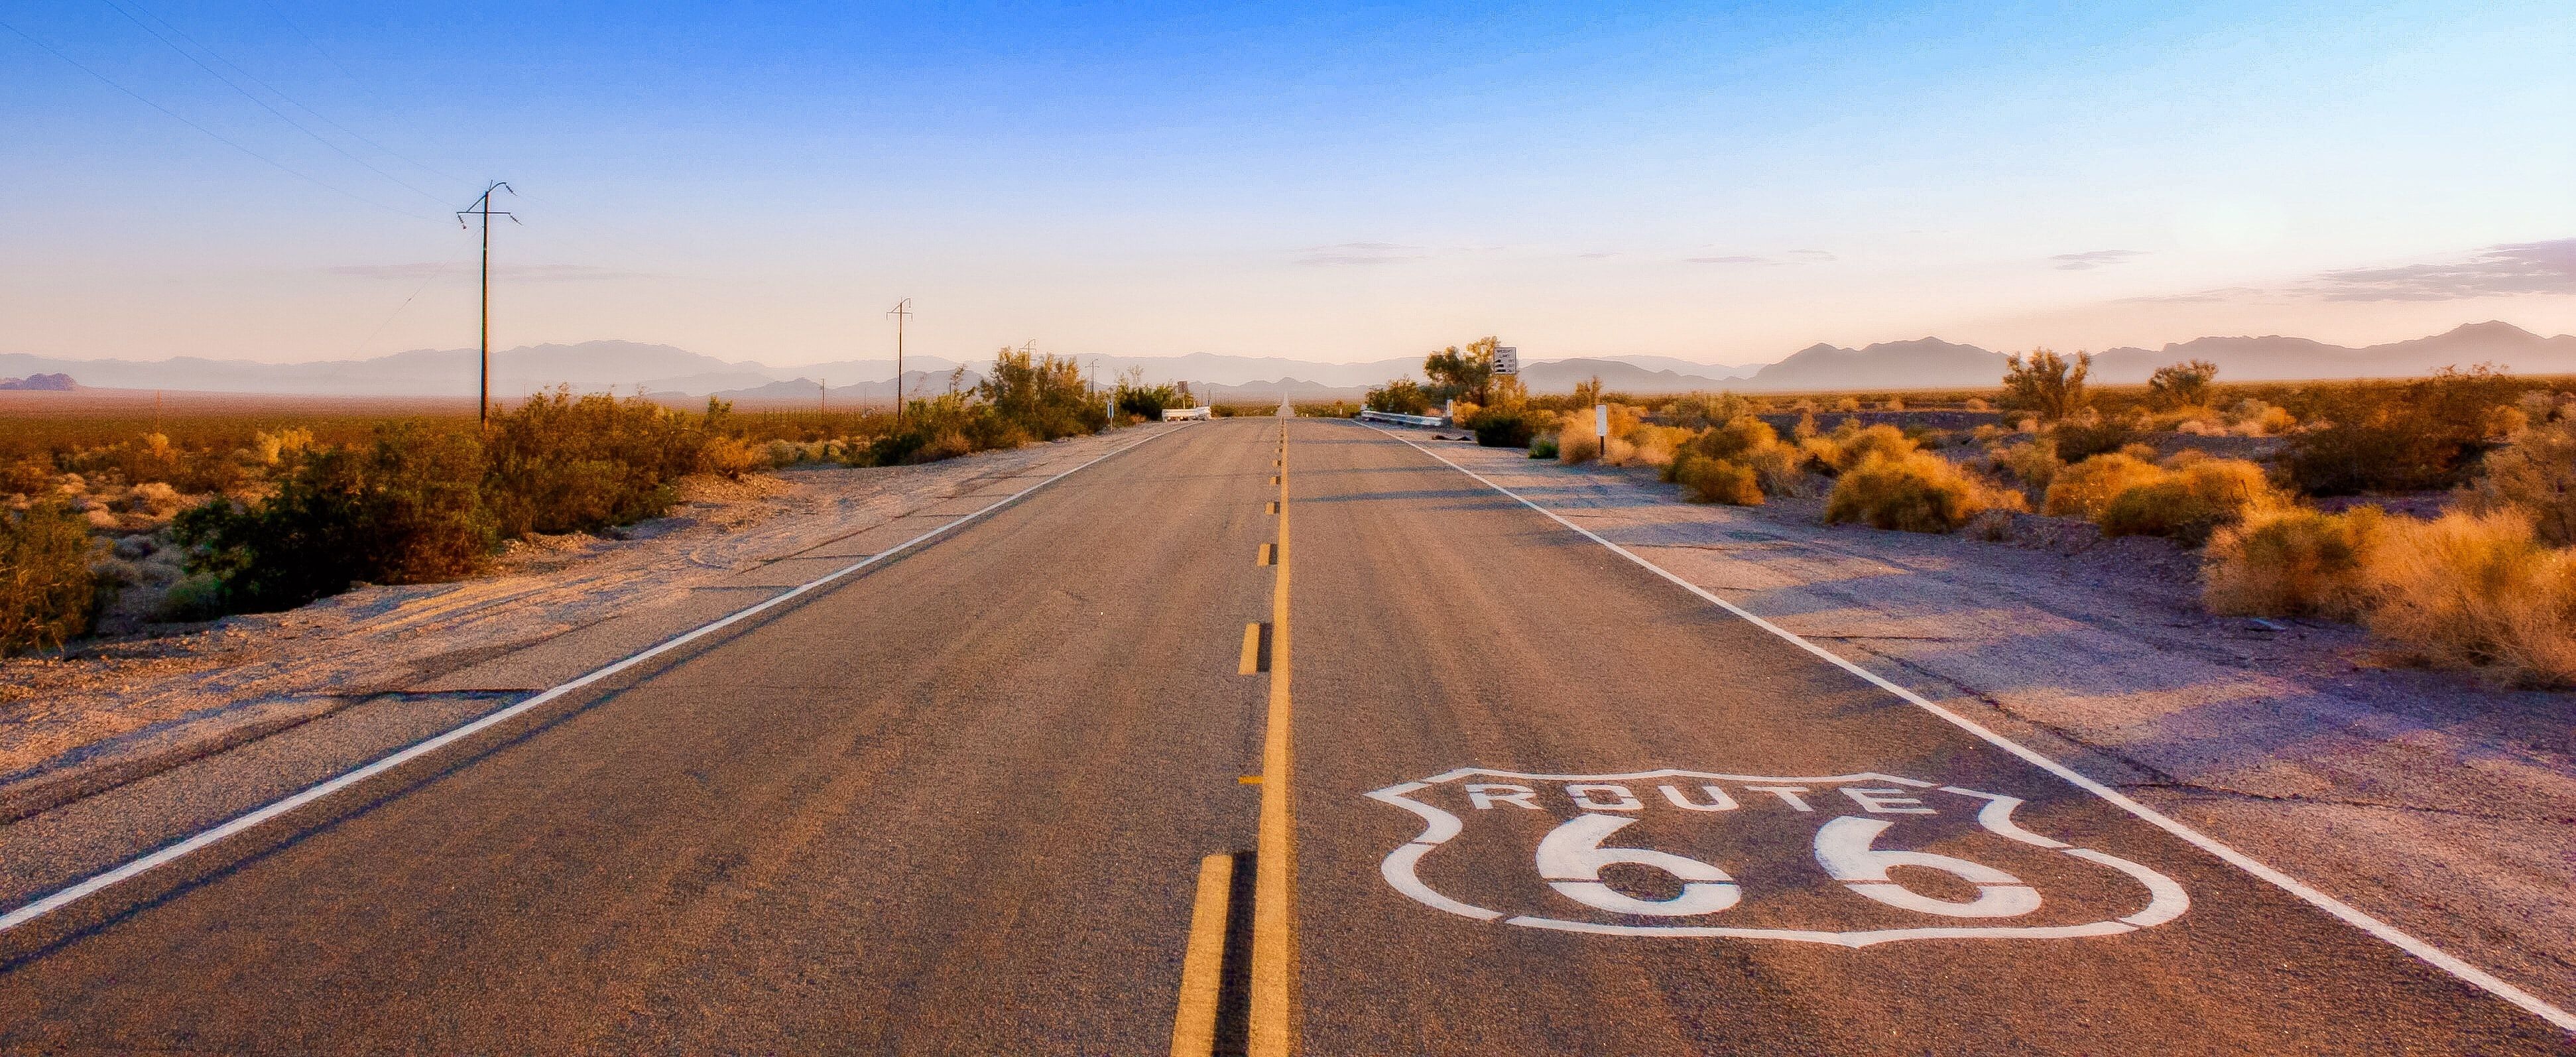 The world-famous Route 66